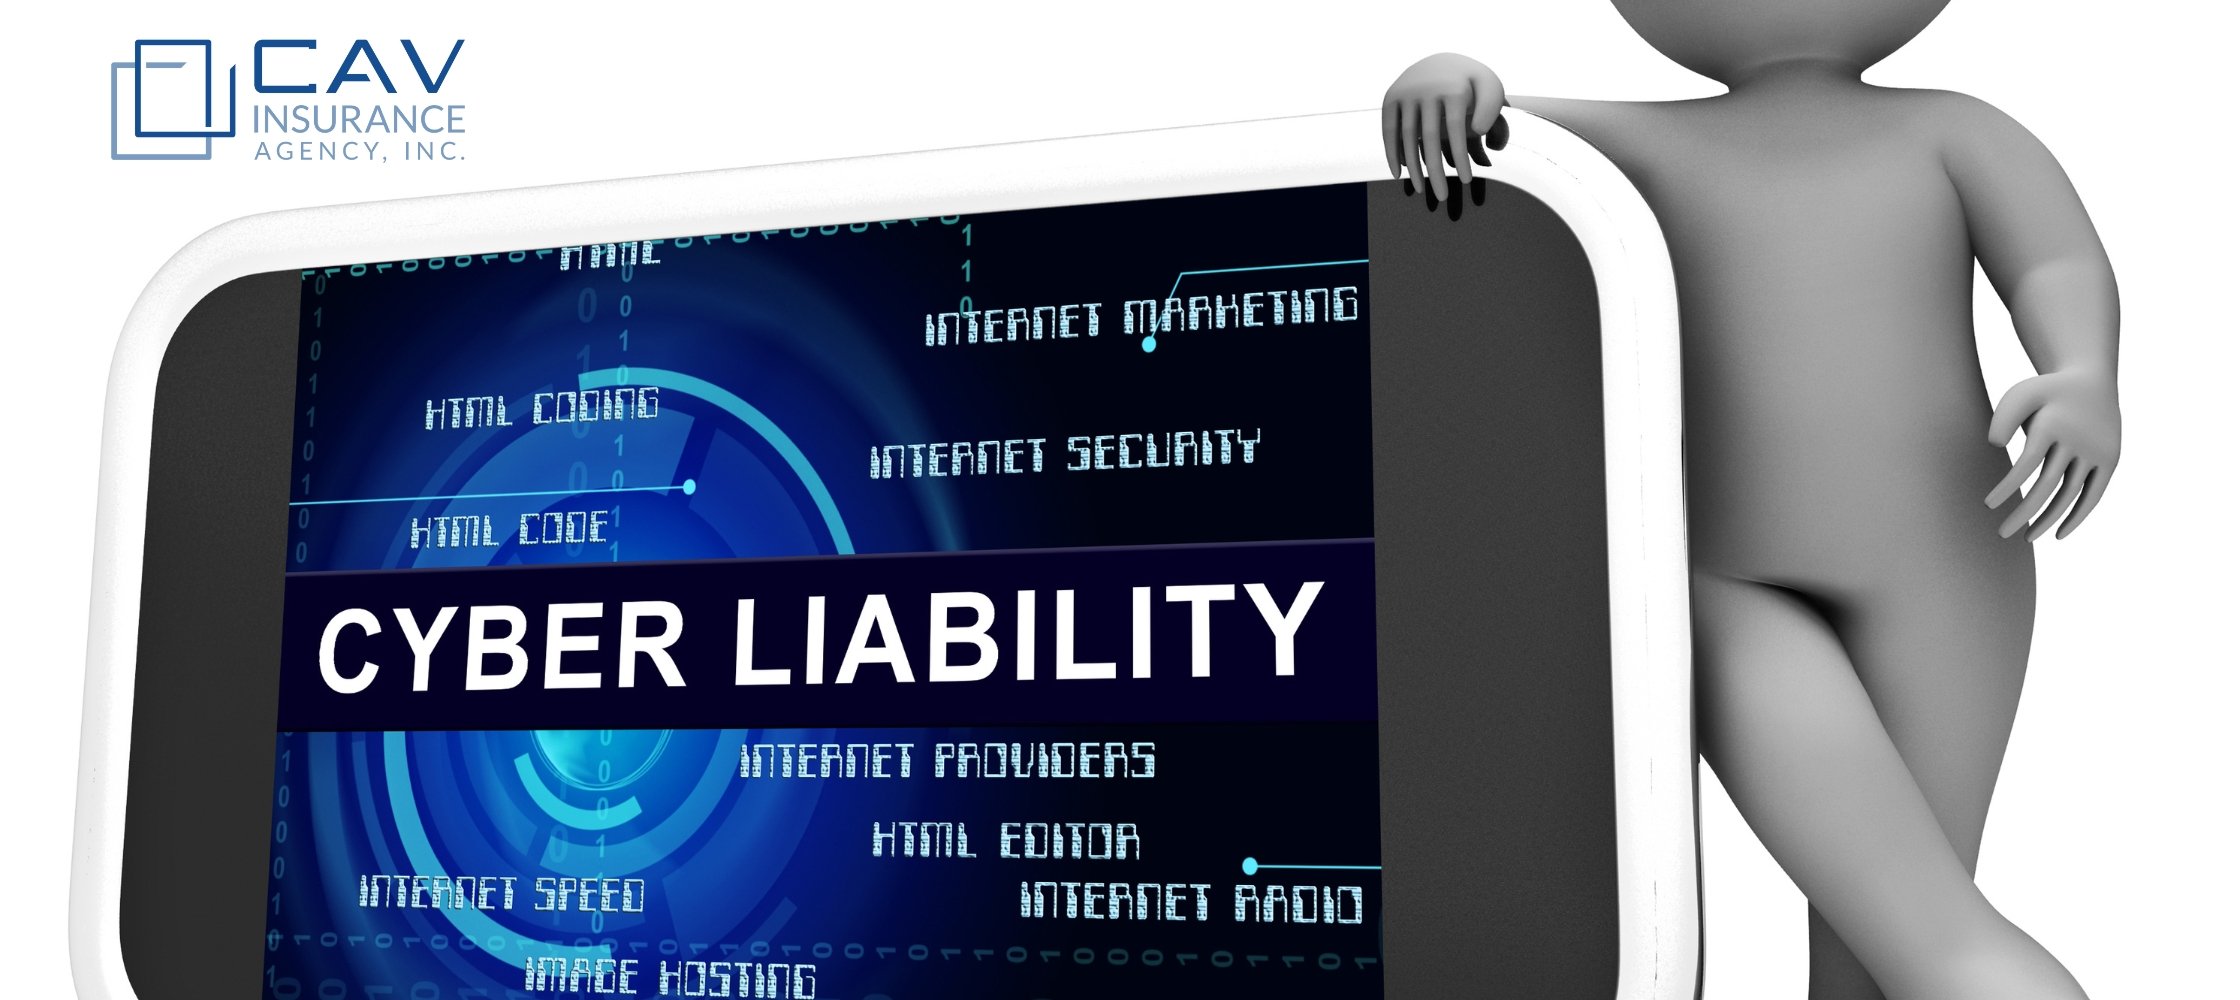 A Quick Look at the Basics of Cyber Liability